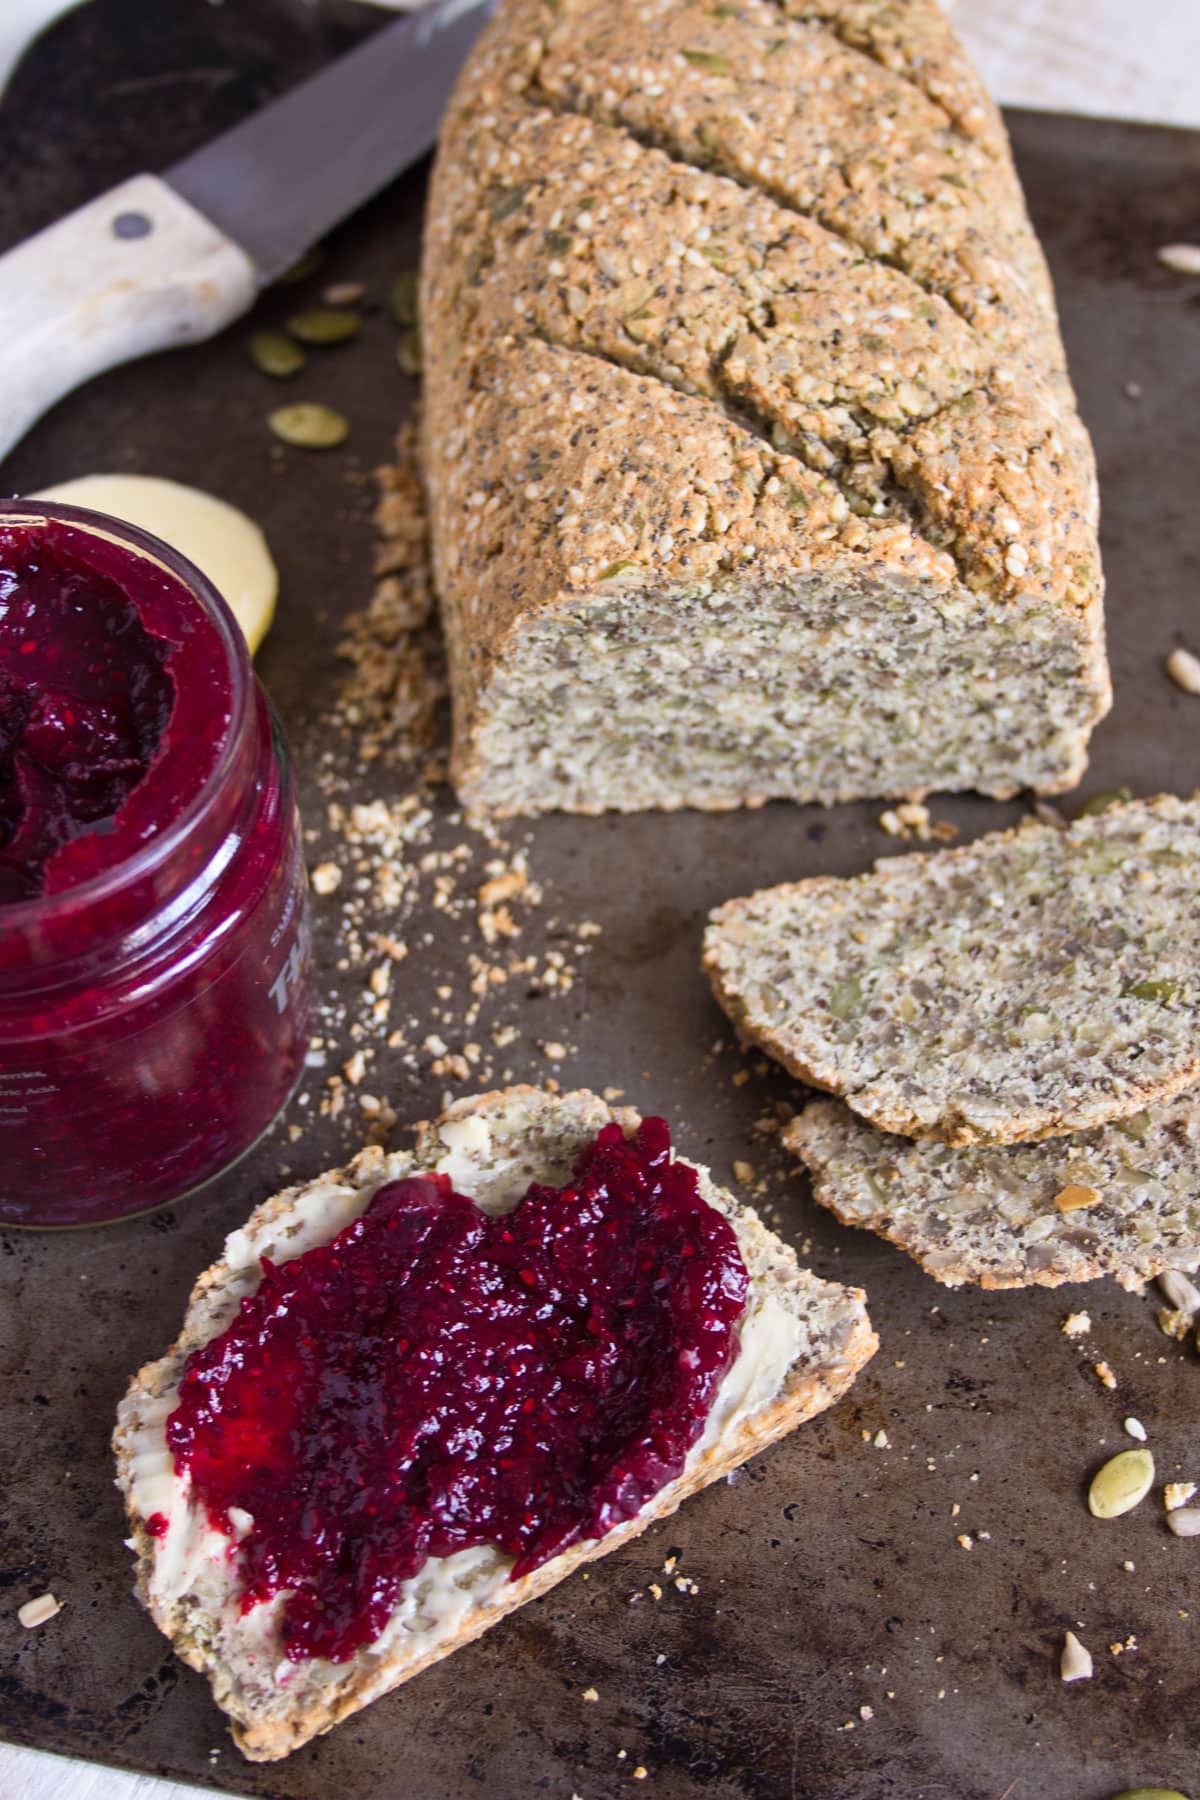 A loaf of seeded bread and a slice of bread that is buttered and spread with jam.